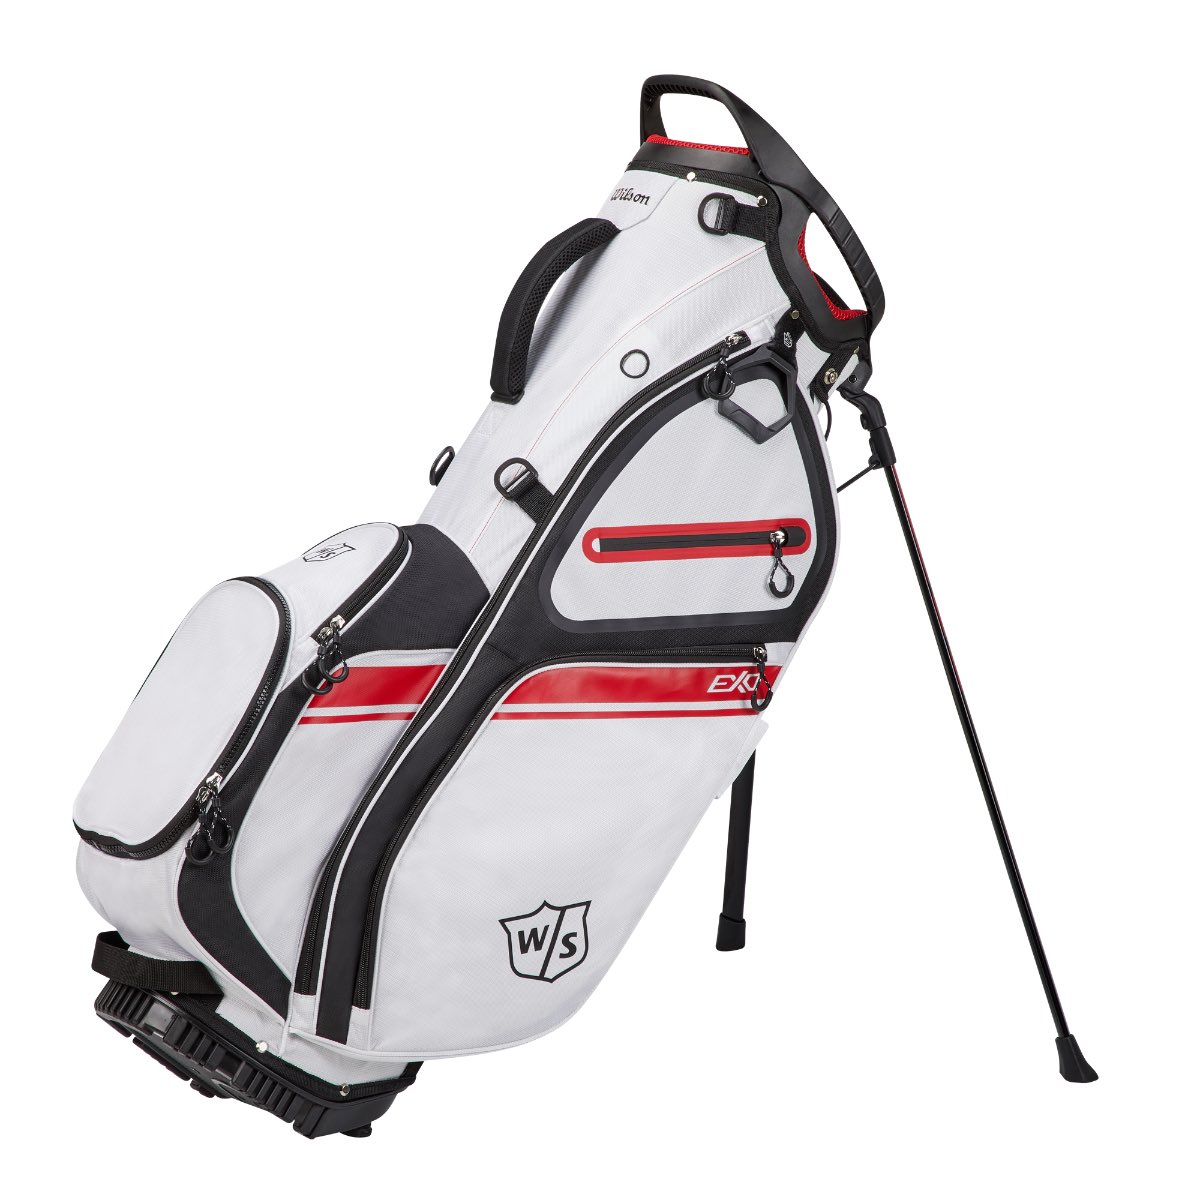 The Exo Carry Bag is an innovative, organised Premuim Carry Bag from Wilson Golf packed full of all the features you would need on the golf course. Was £159.99 ❌ Now £129.99 ✅ Check it out 👉 thegolfstore4u.co.uk/product/wilson…